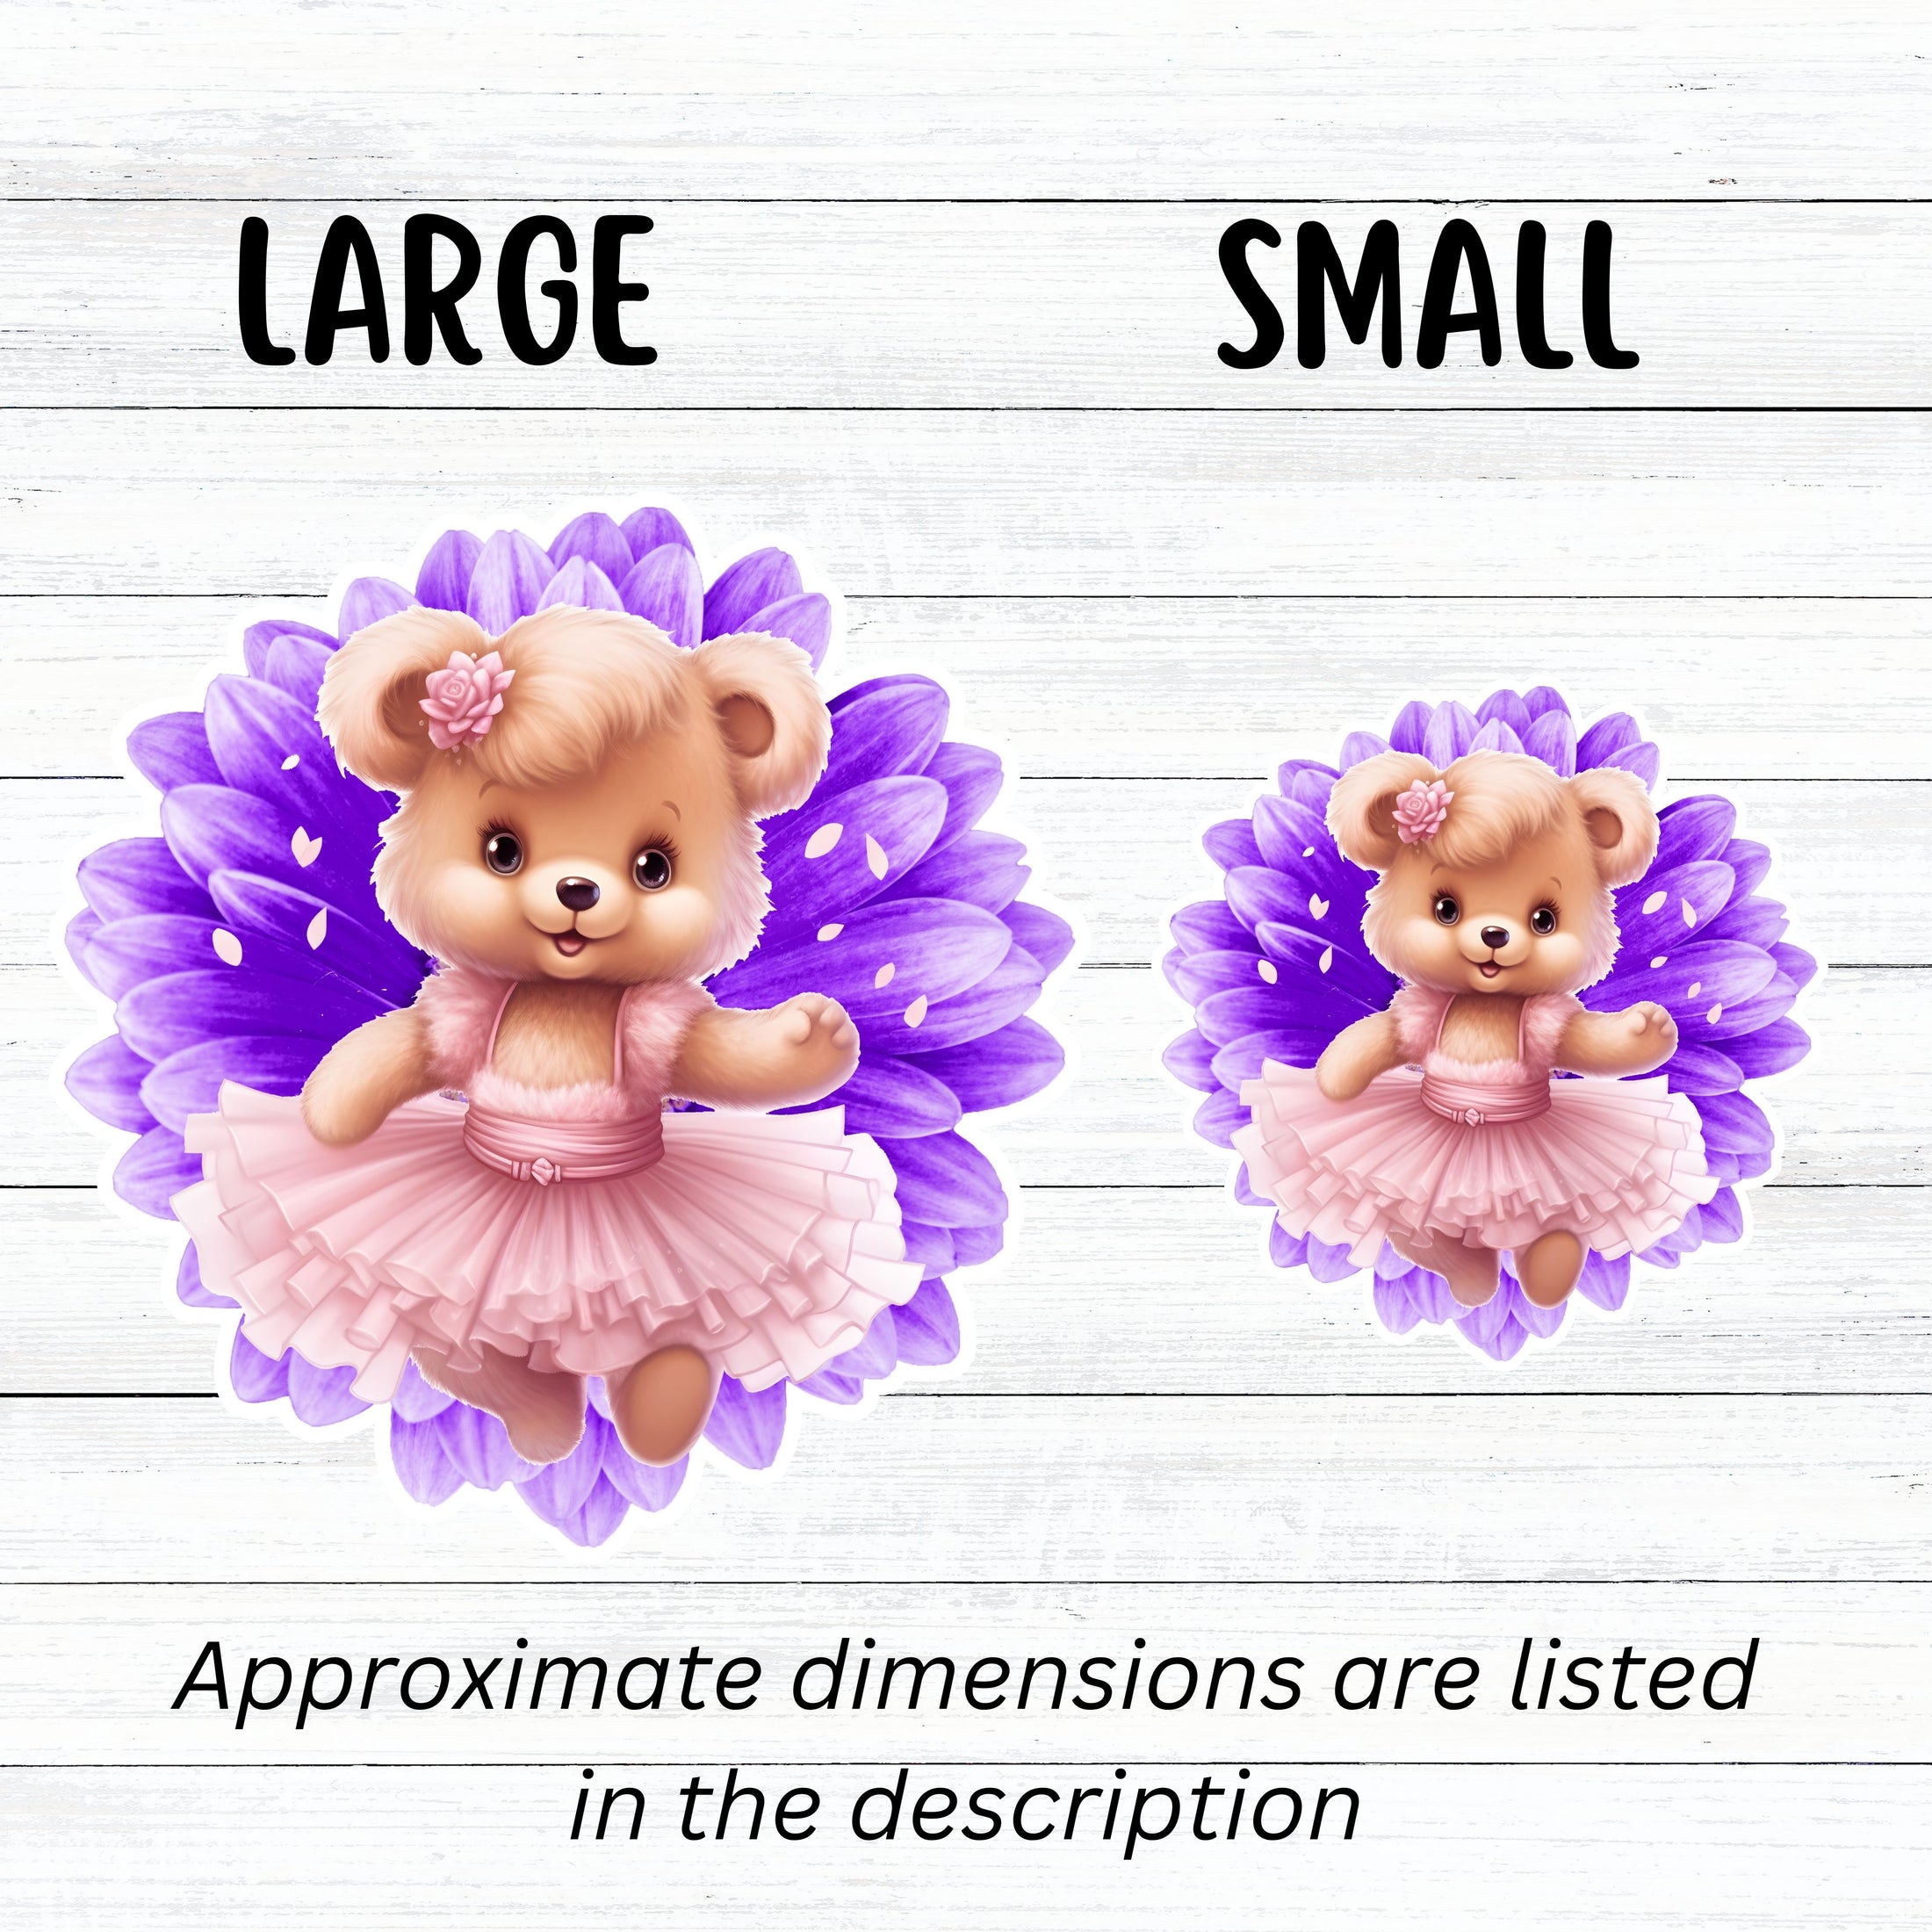 This image shows large and small teddy bear on purple stickers next to each other.